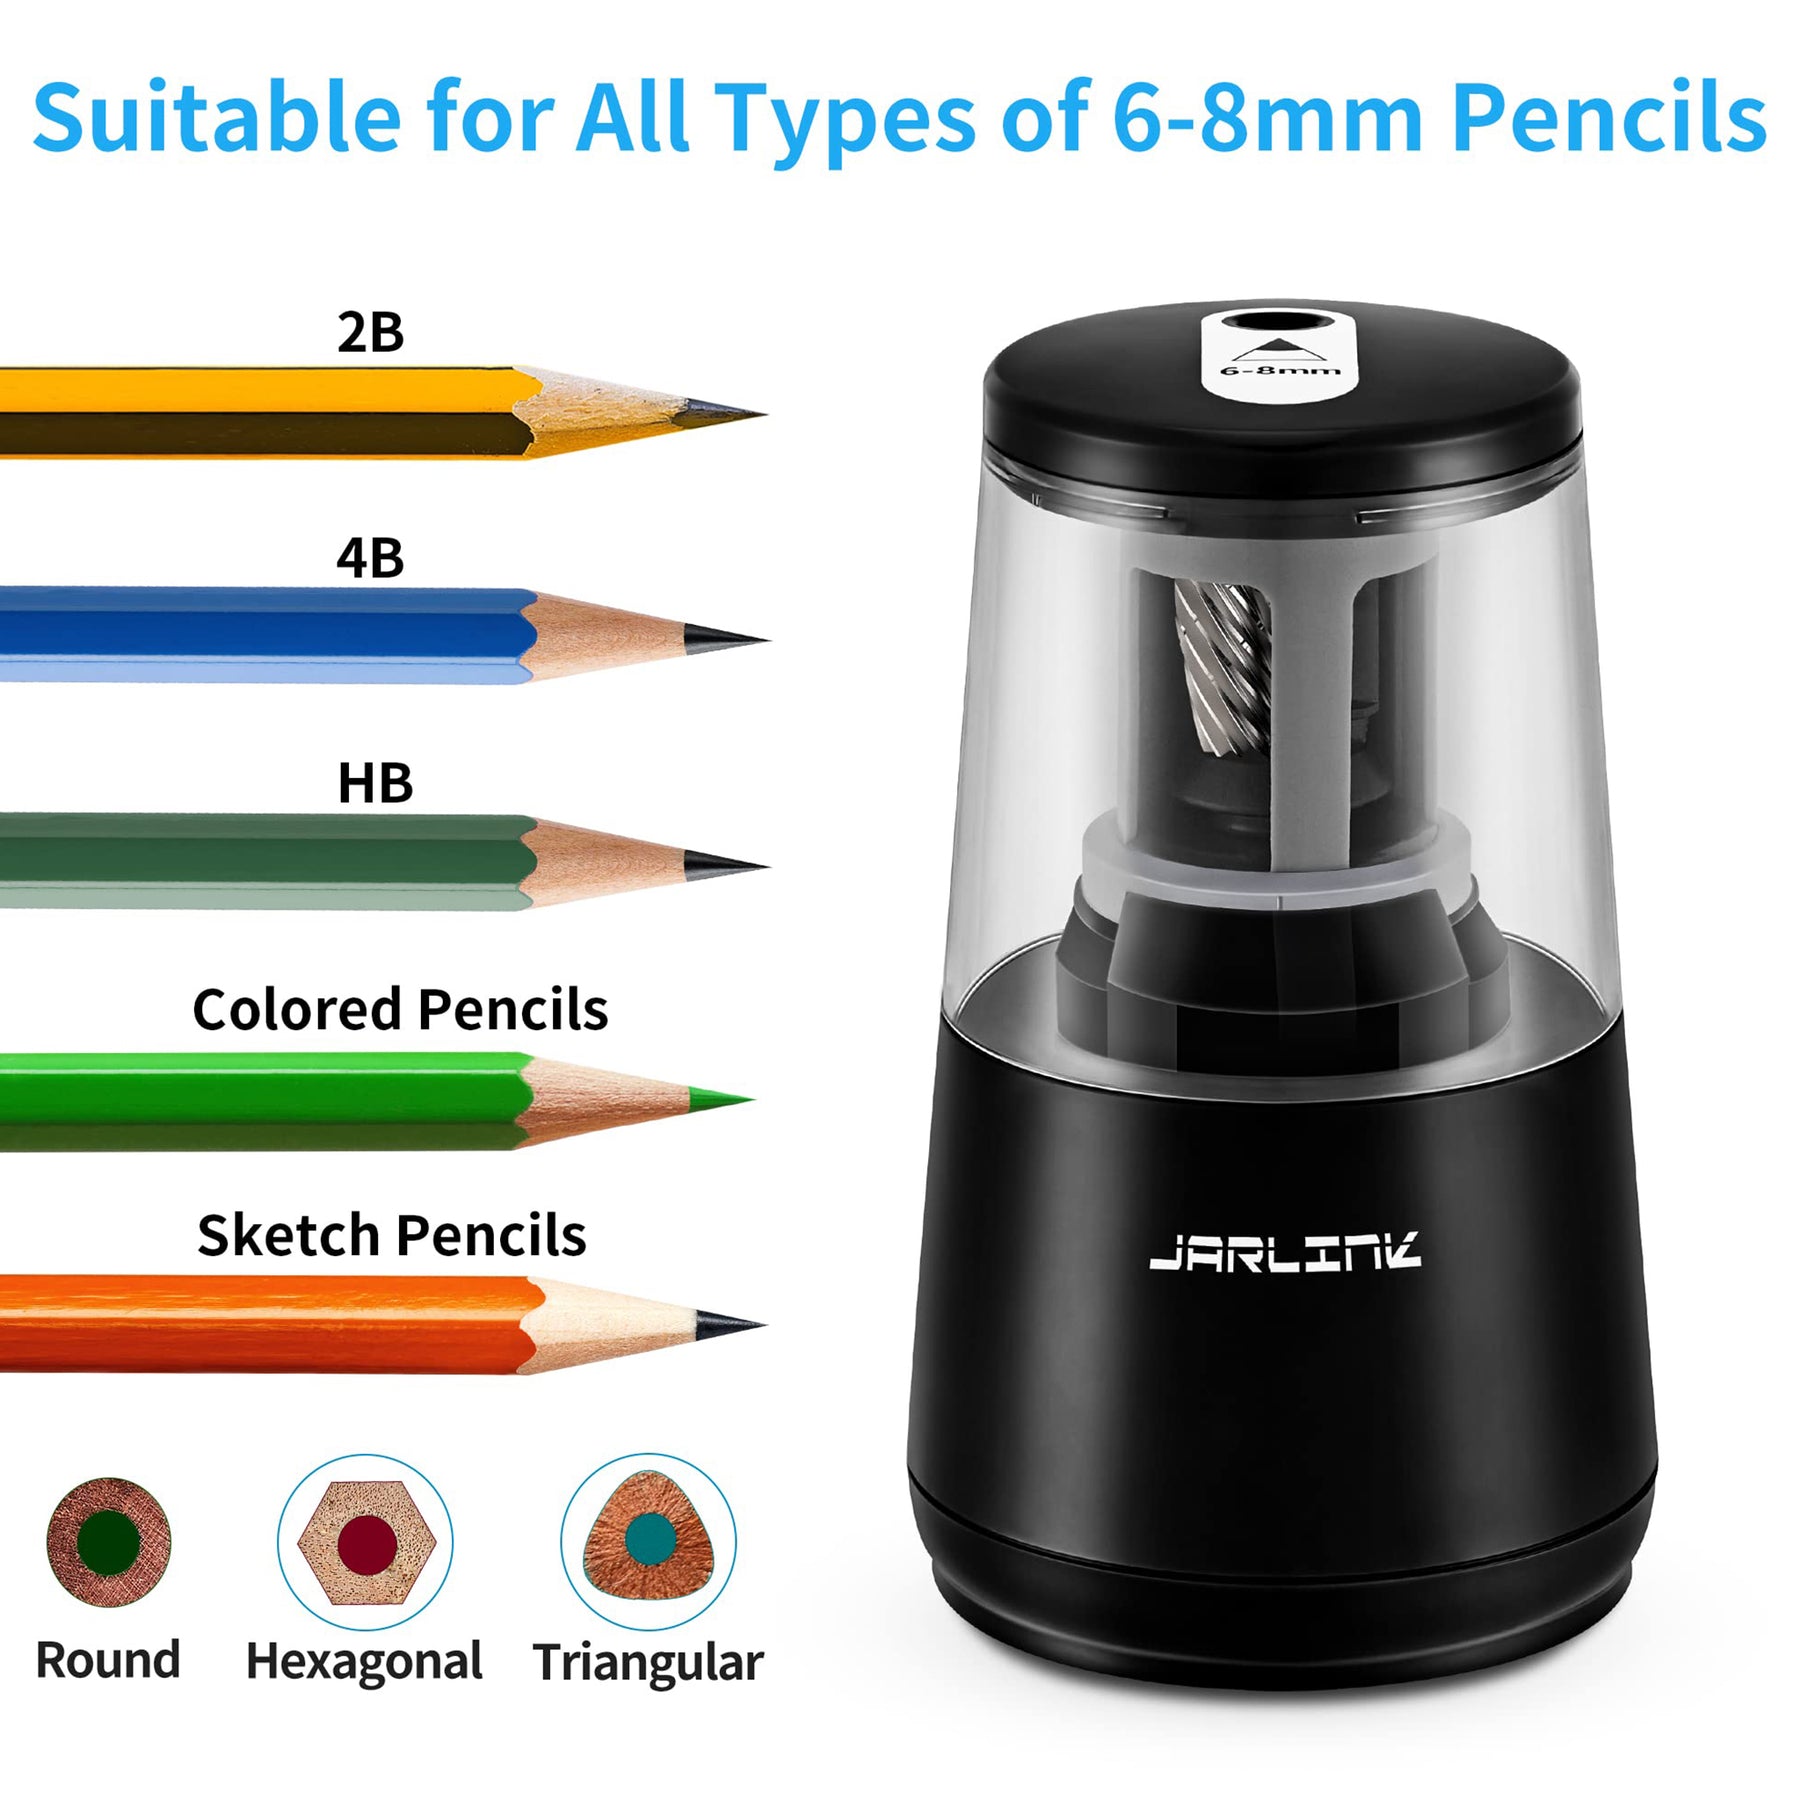 JARLINK Electric Pencil Sharpener, Heavy-duty Helical Blade to Fast Sh